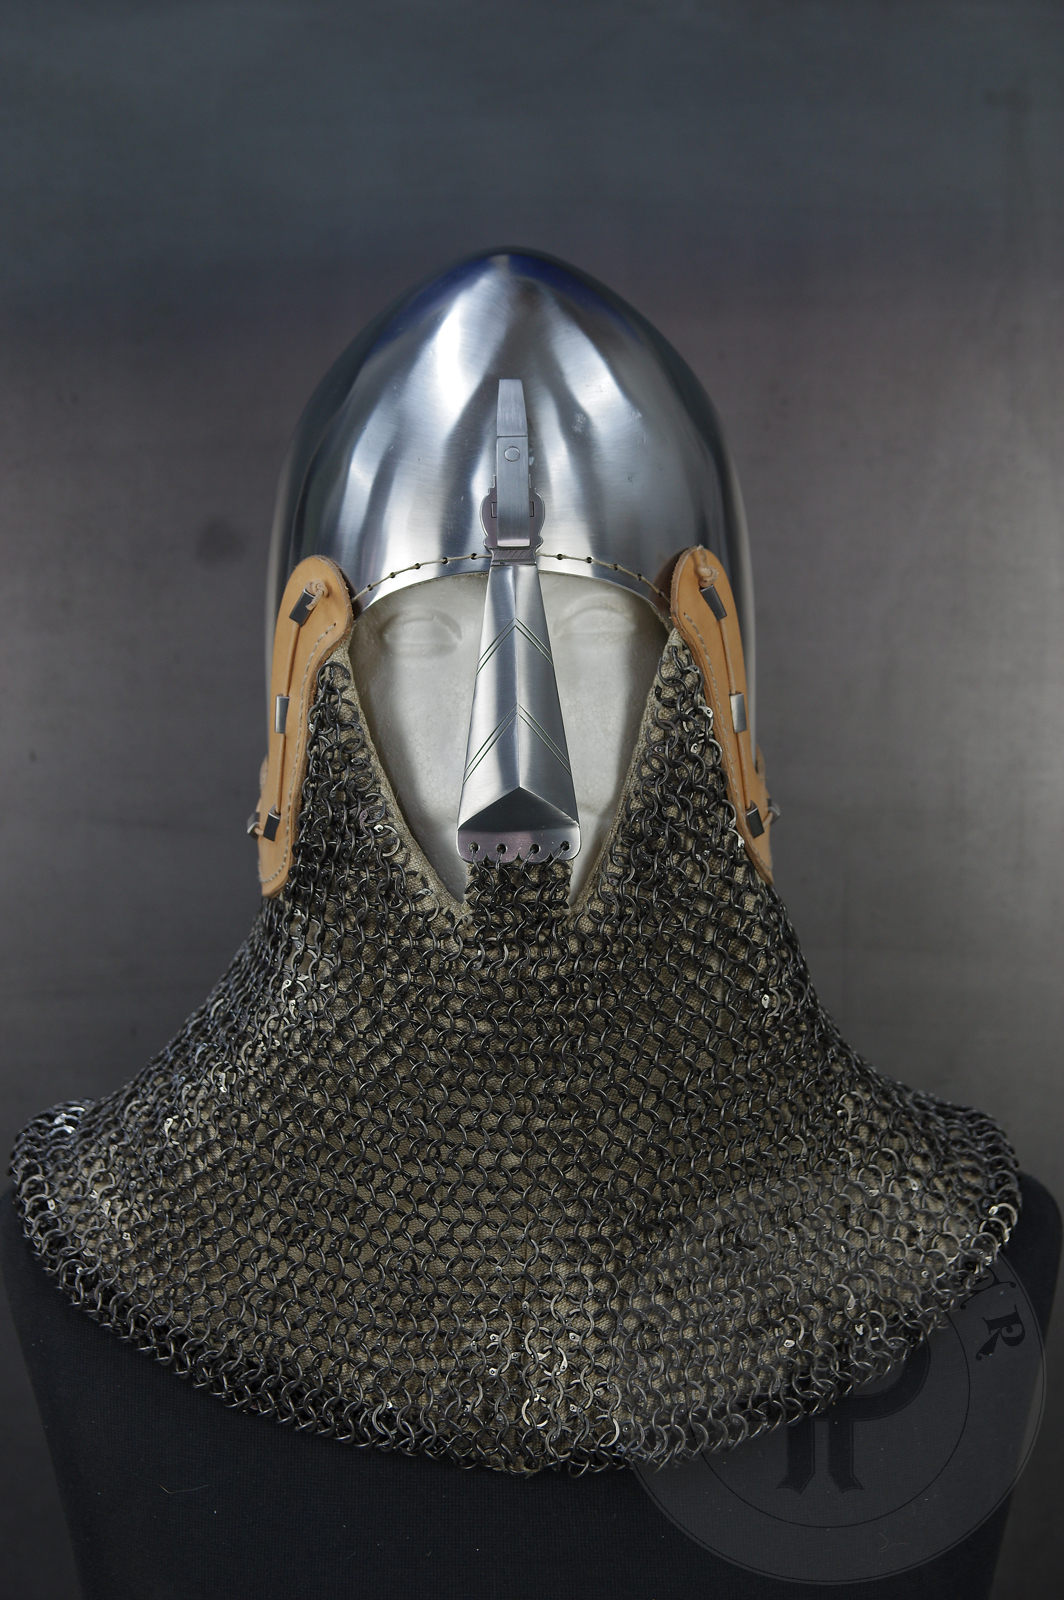 Reproduction of the helmet from Nysa(Poland) equipped with a nasal guard based on the original from Amersfoort (Holland). / Replika hemu z Nysy wyposaona w nosal wzorowany na oryginale z Amersfoort w Holandii.